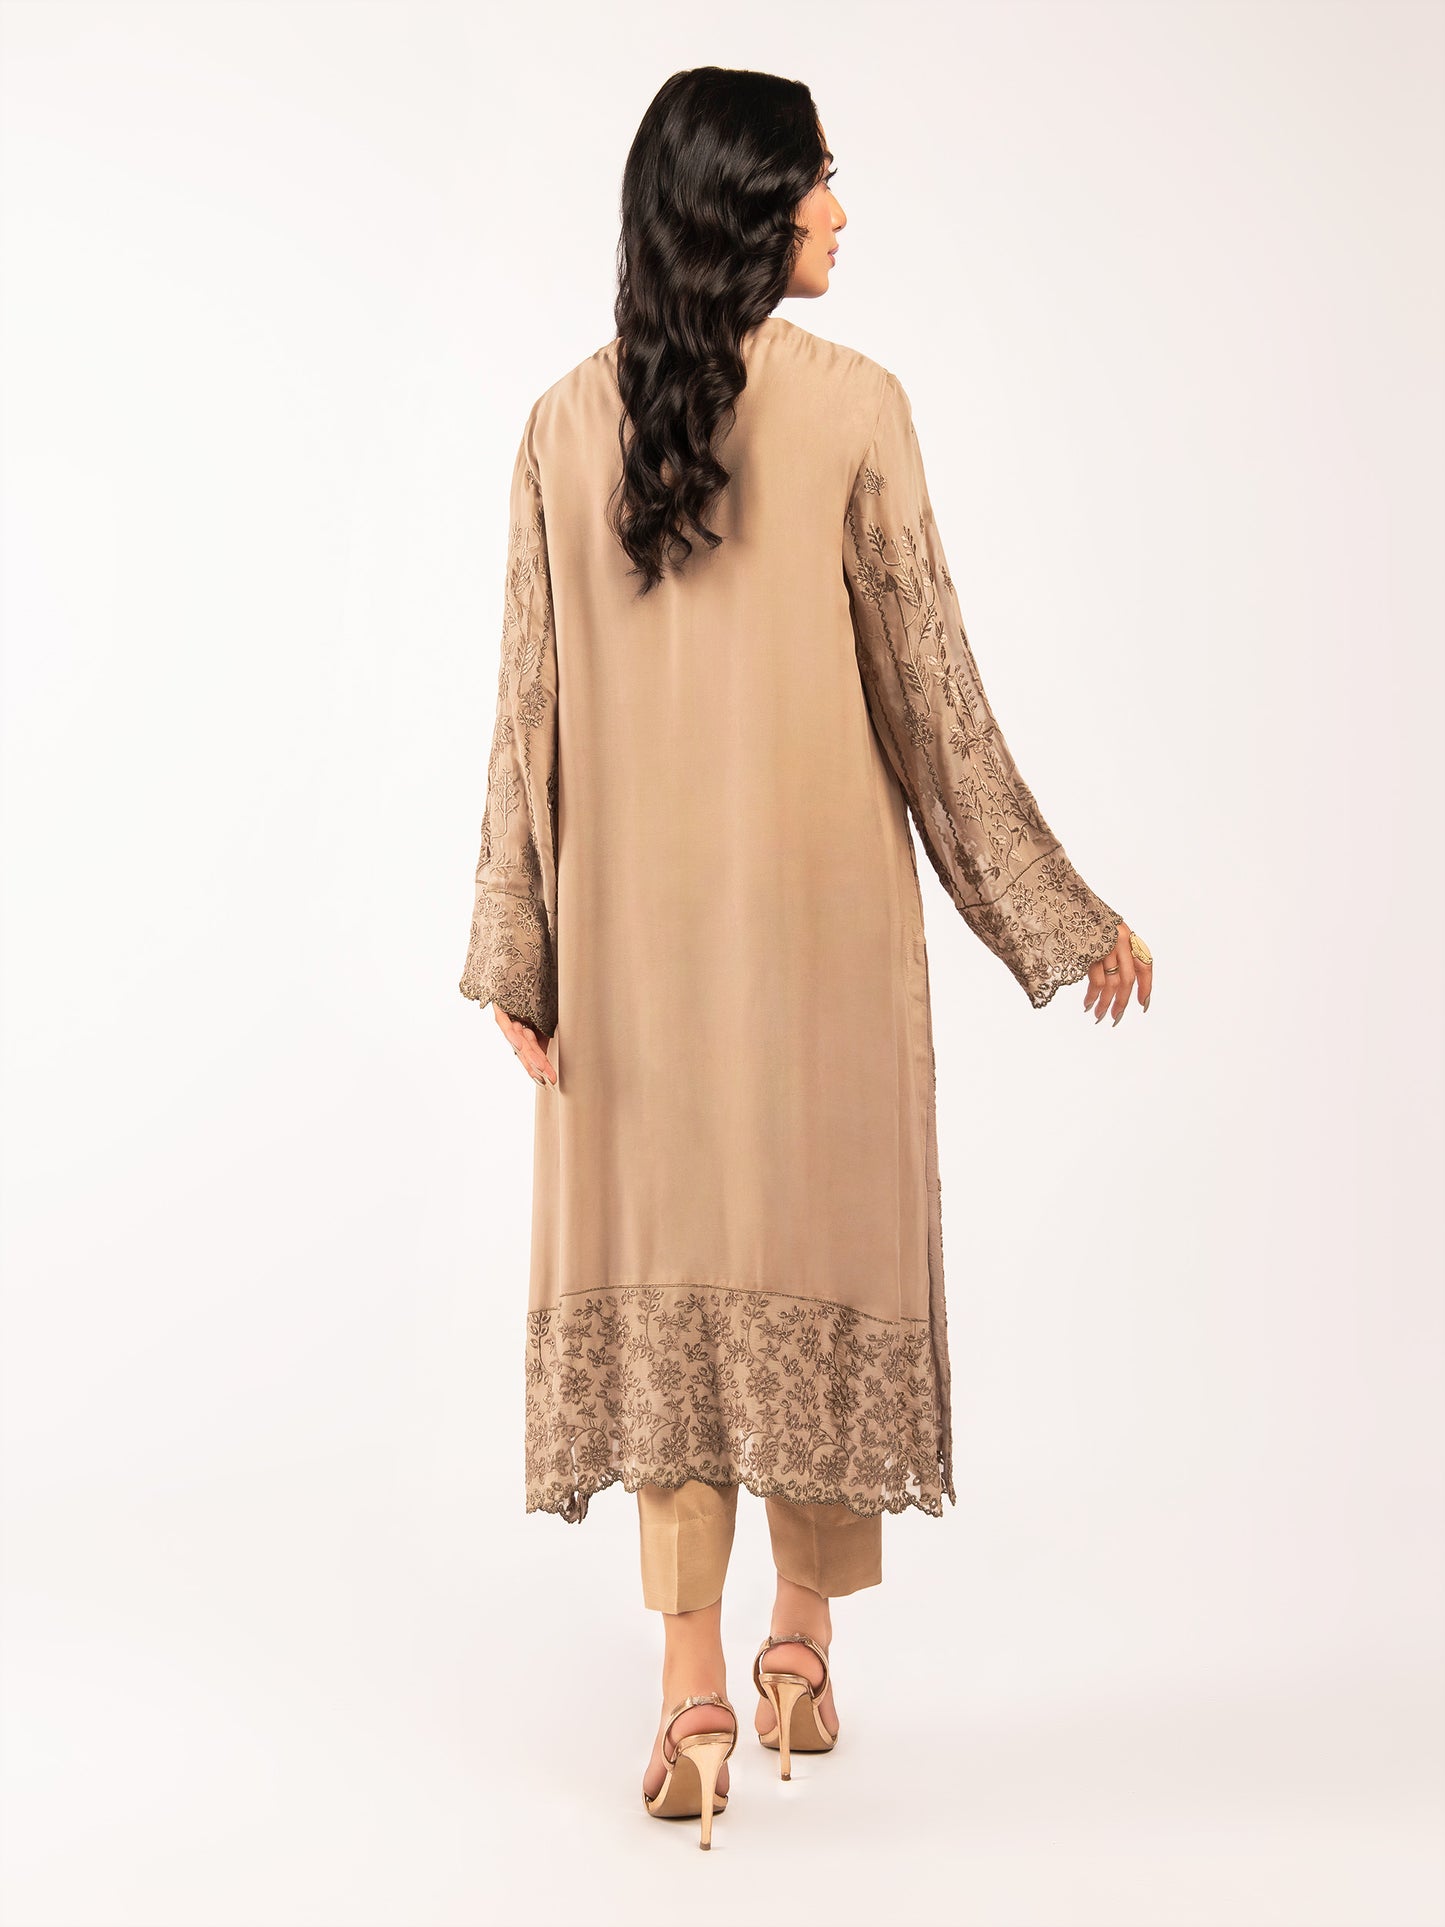 Embroidered Chiffon Suit